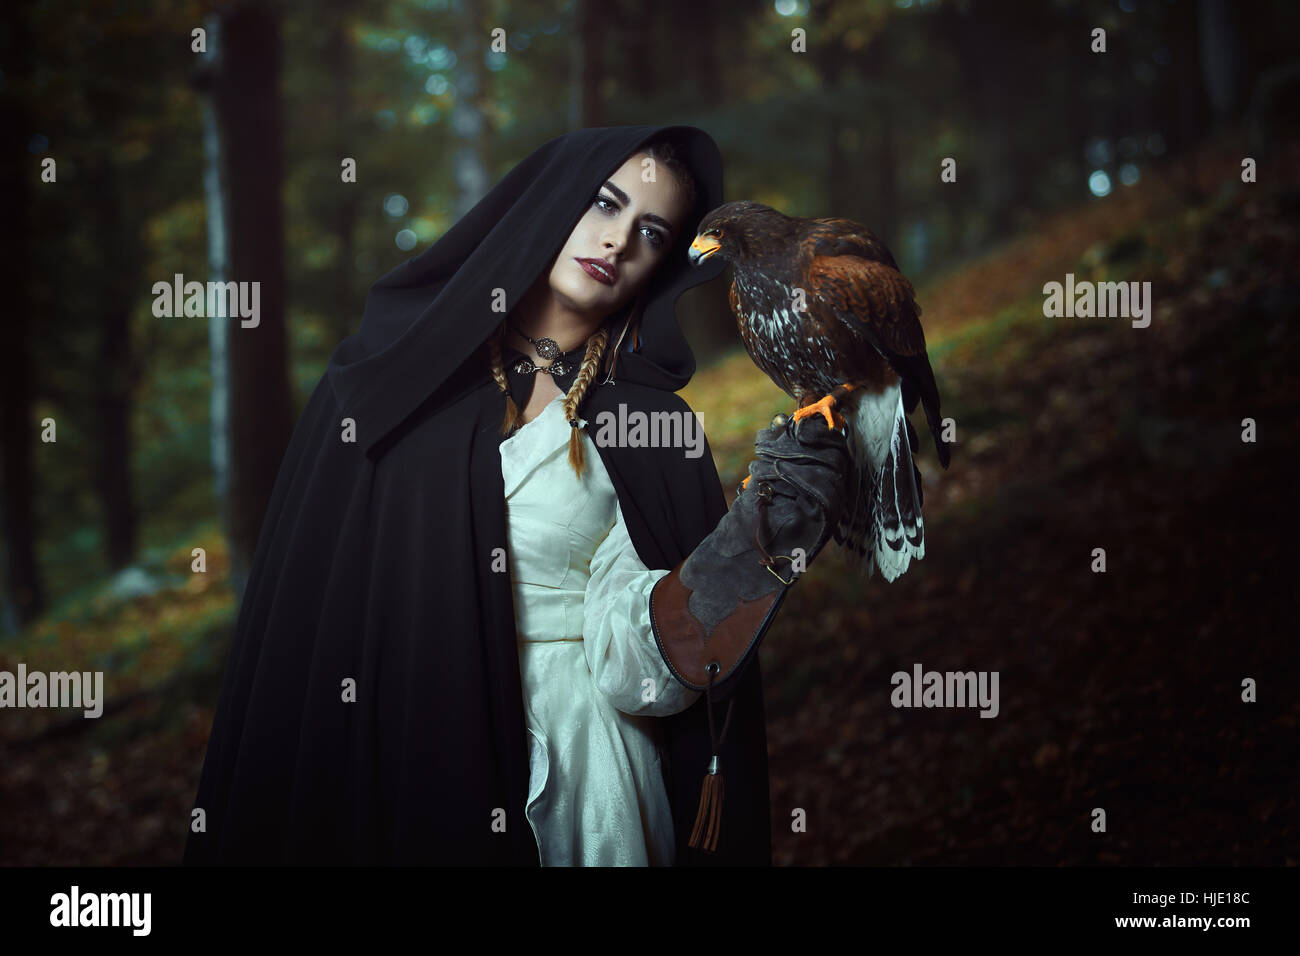 Black hooded woman with harris hawk in dark woods. Fantasy concept Stock Photo